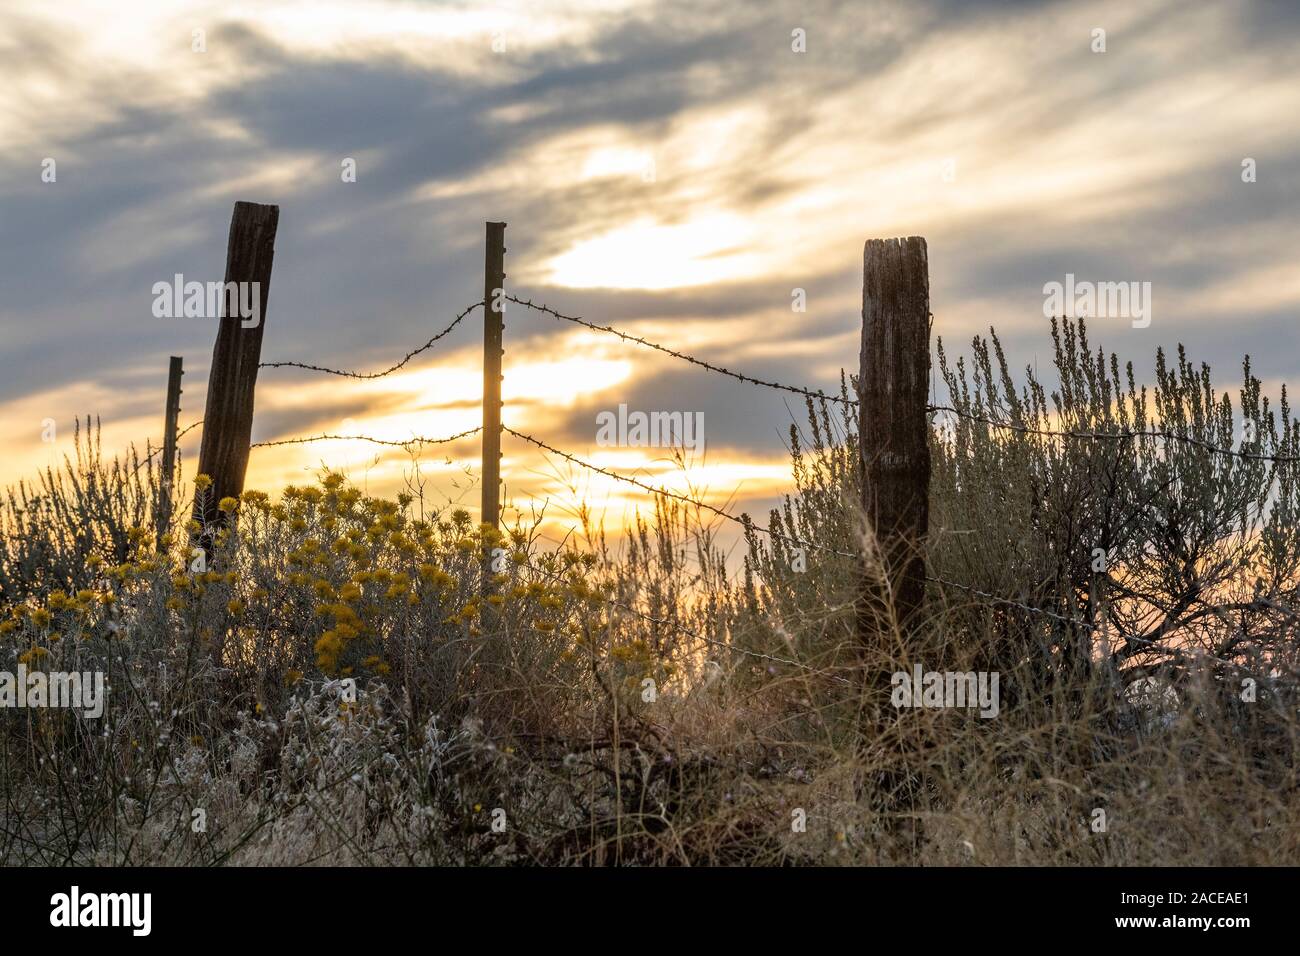 Sagebrush and barbed wire fence at Boise Foothills in Boise, Idaho, USA Stock Photo